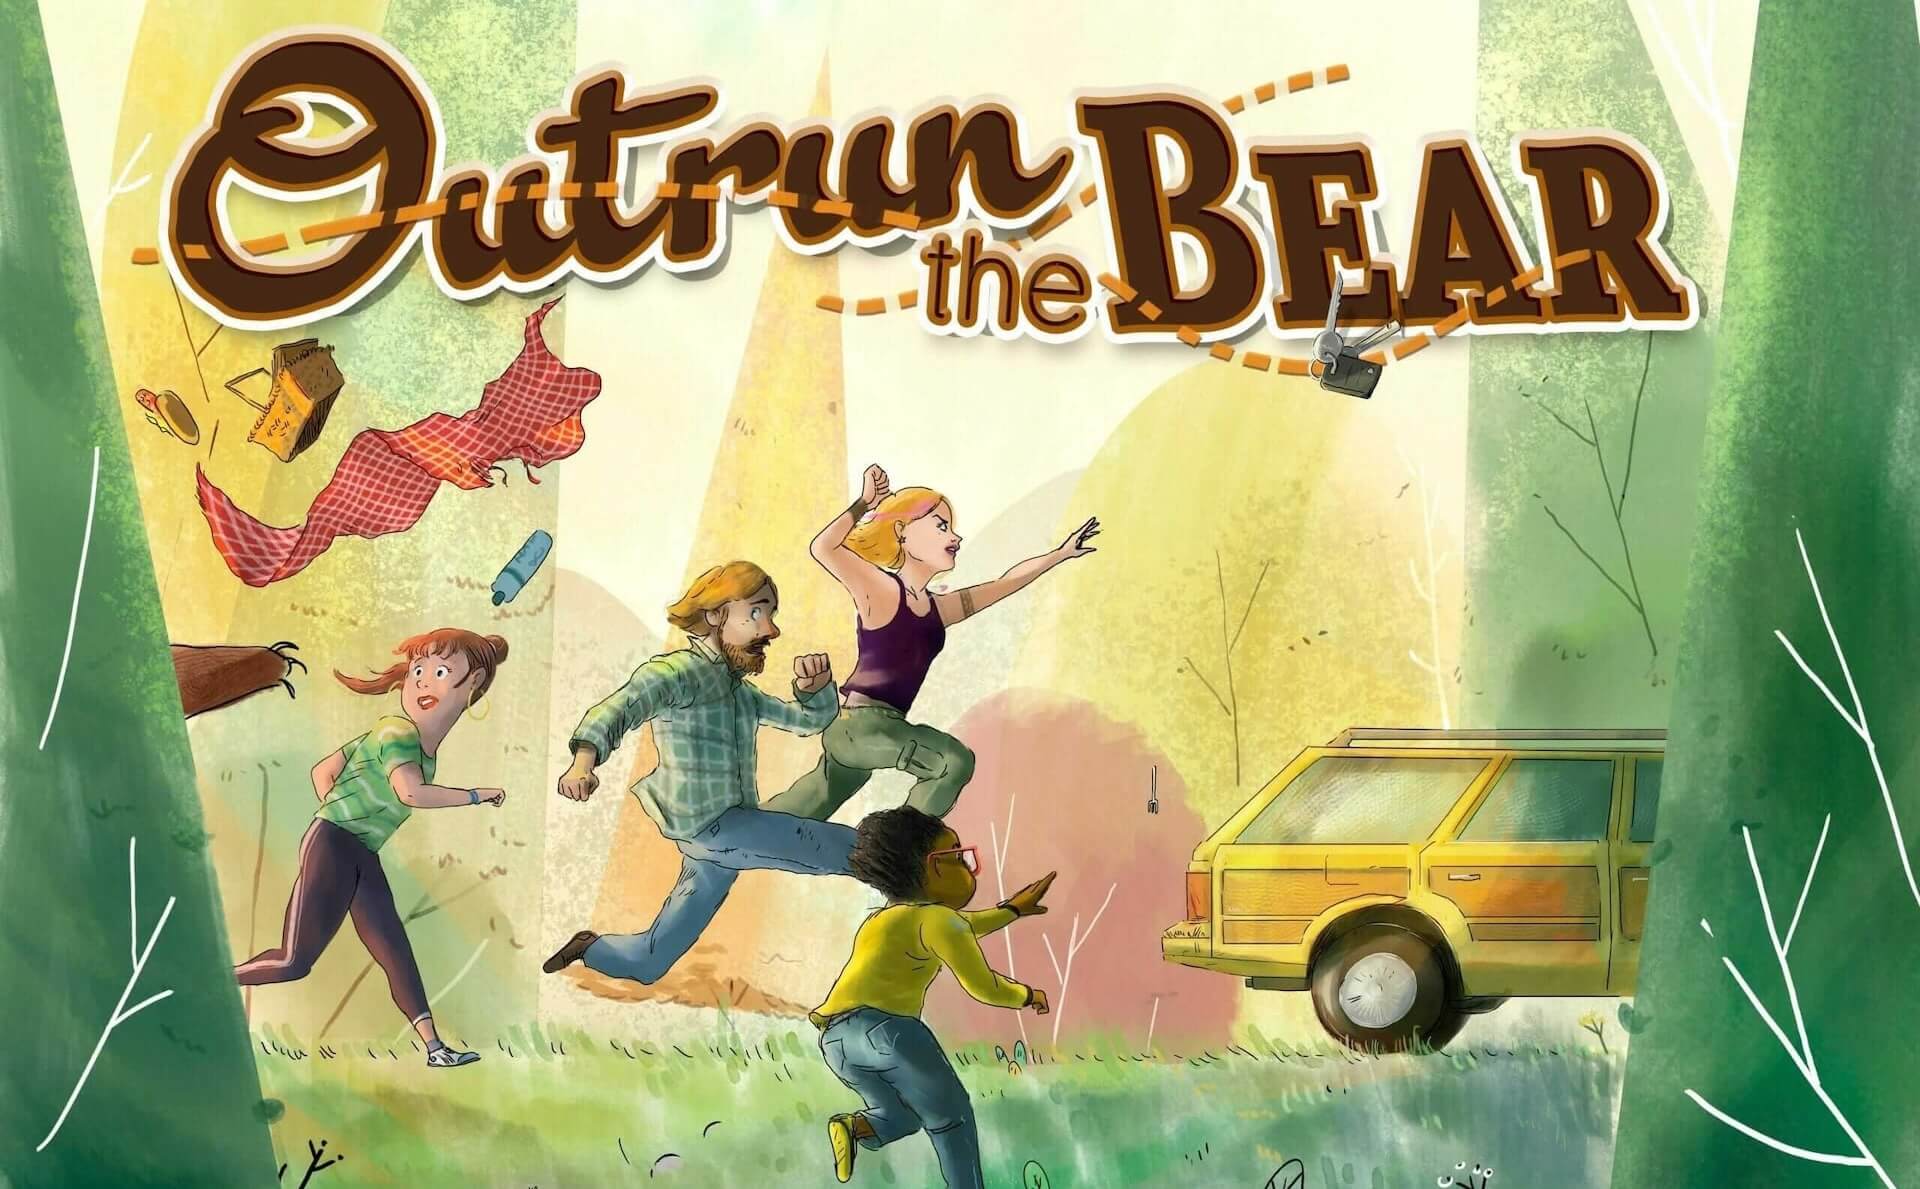 Colorful illustration of several game characters runnning, frightened, towards a retro station wagon while a bear's paw reaches toward them from the left side of the scene.